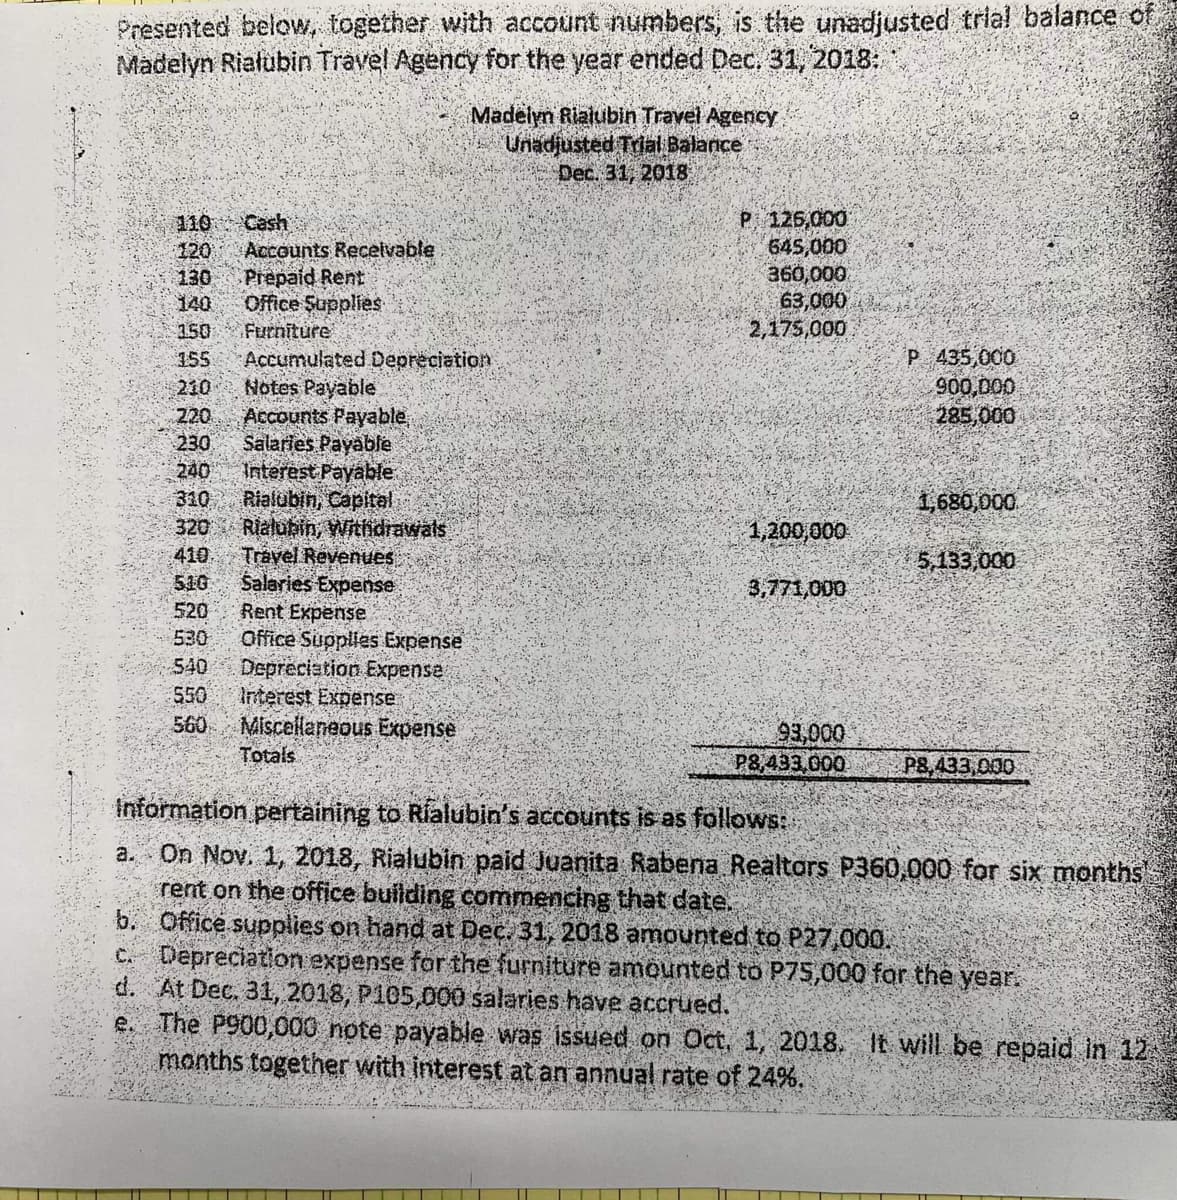 Presented below, together with account numbers, is the unadjusted trial balance of
Madelyn Rialubin Travel Agency for the year ended Dec. 31, 2018:
Madelyn Riatubin Travel Agency
Unadjusted Trial Balance
Dec. 31, 2018
P 125,000
645,000
360,000
63,000
2,175,000
110 Cash
Accounts Recelvable
Prepaid Rent
Office Supplies
Furniture
Accumulated Depreciation
Notes Payable
Accounts Payable
Salaries Payable
Interest Payable
Rialubin, Capital
Rialubin, Withdrawals
Travel Revenues
Salaries Expense
Rent Expense
Office Supplies Expense
Deprecistion Expense
Interest Expense
Miscellaneous Expense
Totals
120
130
140
150
P 435,000
900,000
285,000
155
210
220
230
240
310
320
1,680,000.
1,200,000
410
516
520
5,133,000
3,771,000
530
540
550
560
93,000
P8,433.000
P8,433,000
Information pertaining to Rialubin's accounts is as follows:
a. On Nov. 1, 2018, Rialubin paid Juanita Rabena Realtors P360,000 for six months
rent on the office building commencing that date.
b. Office supplies on hand at Dec. 31, 2018 amounted to P27,000.
c. Depreciation expense for the furniture amounted to P75,000 for the year.
d. At Dec. 31, 2018, P105,000 salaries have accrued.
e. The P900,000 note payable was issued on Oct, 1, 2018. It will be repaid in 12
months together with interest at an annual rate of 24%.
